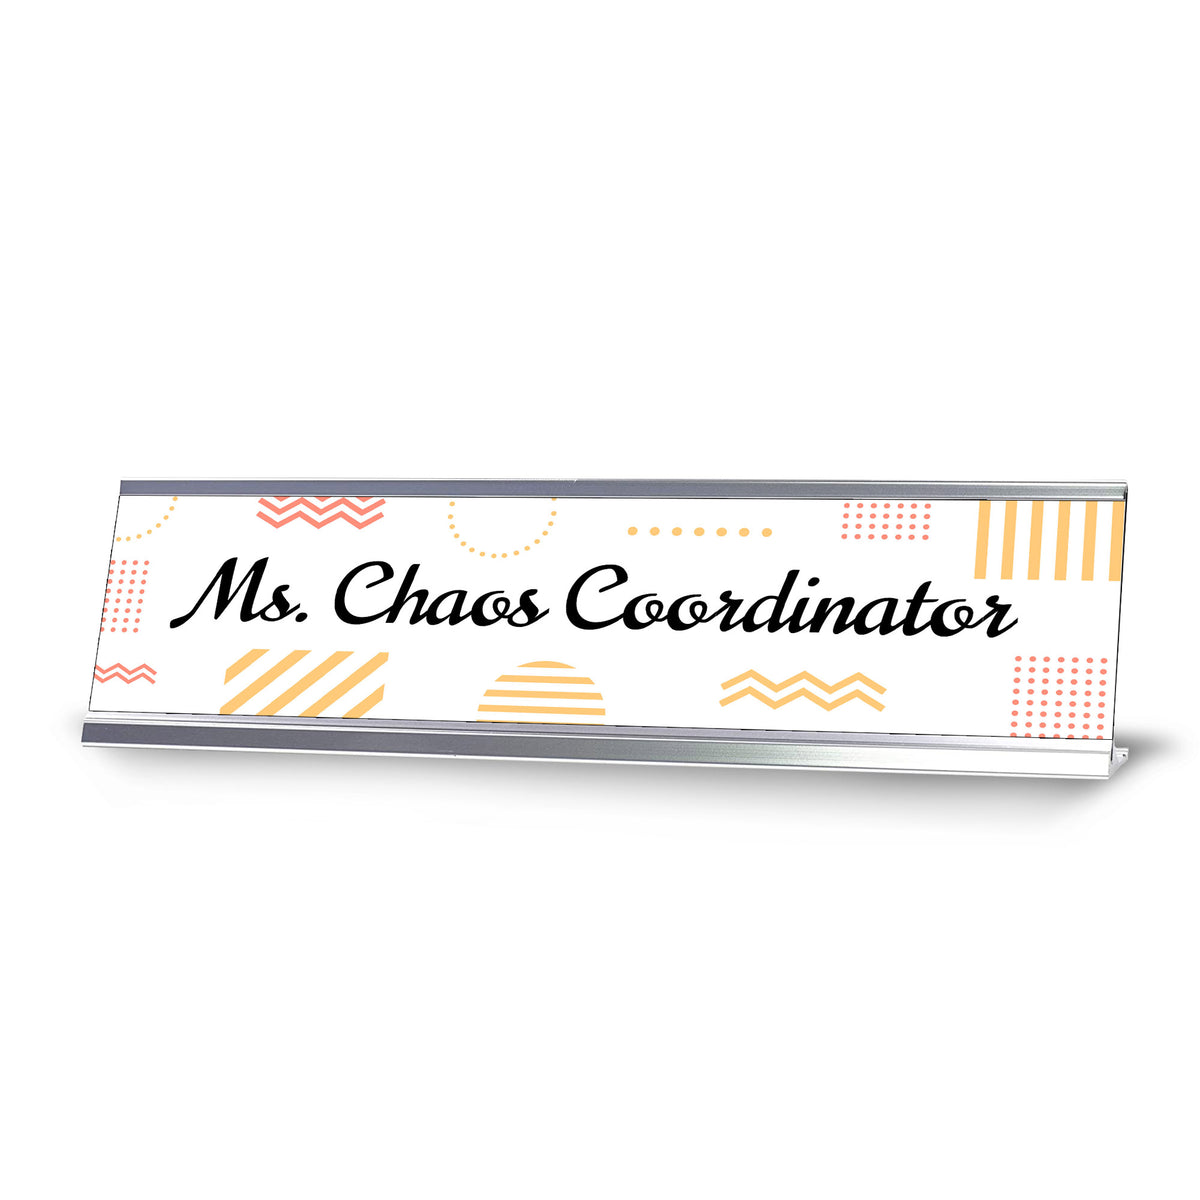 Ms Chaos Coordinator, Geometric Patterns Novelty Office Gift Desk Sign (2 x 8")